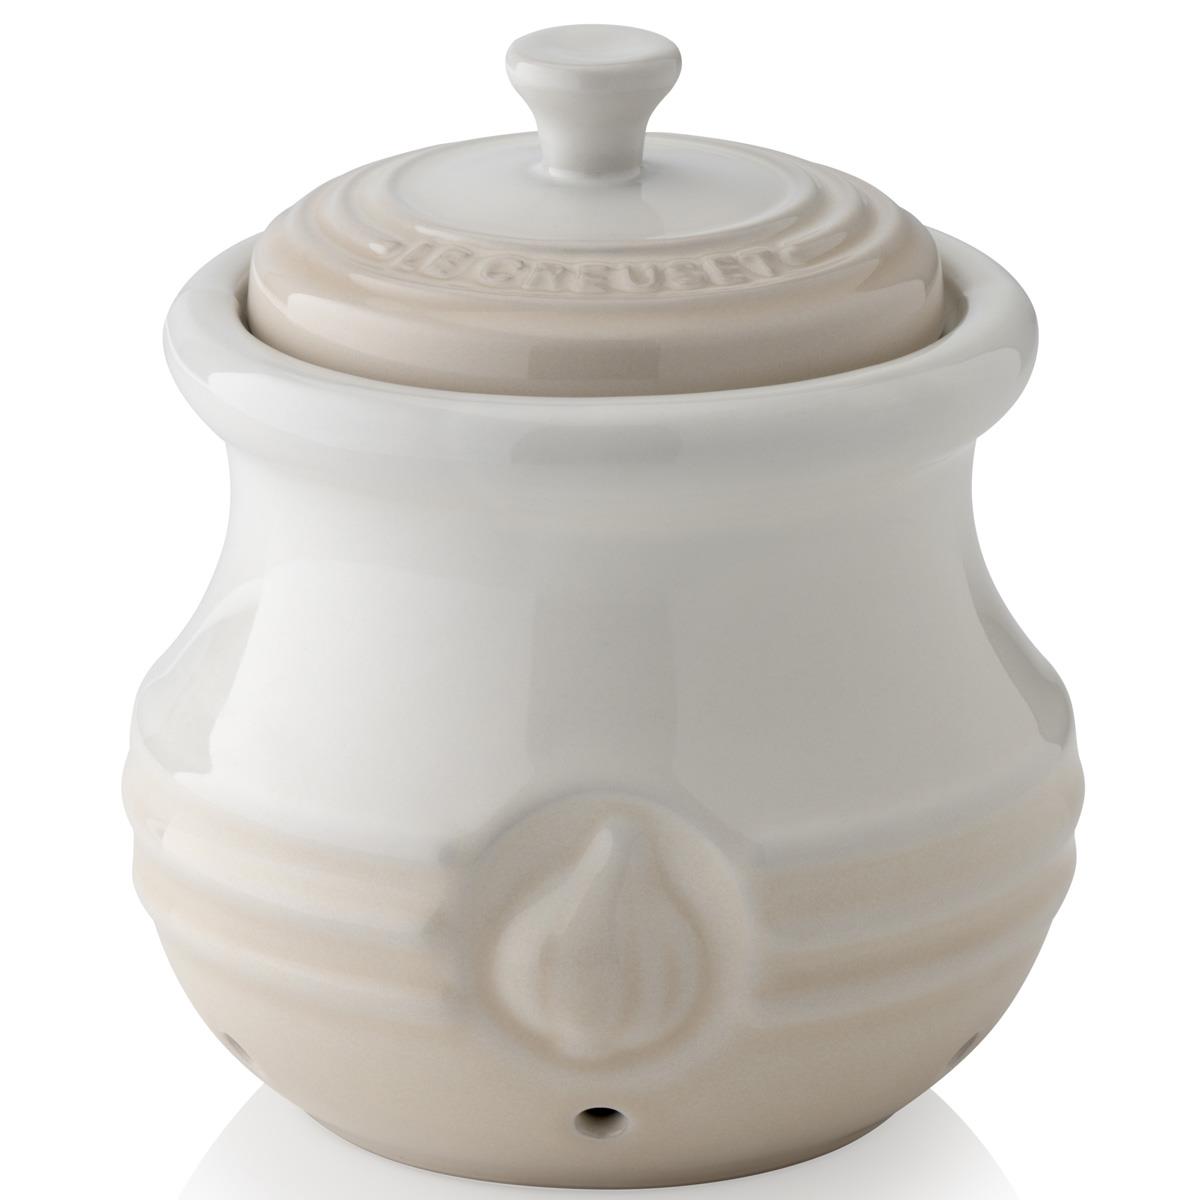 Le Creuset Stoneware Garlic Keeper Questions & Answers